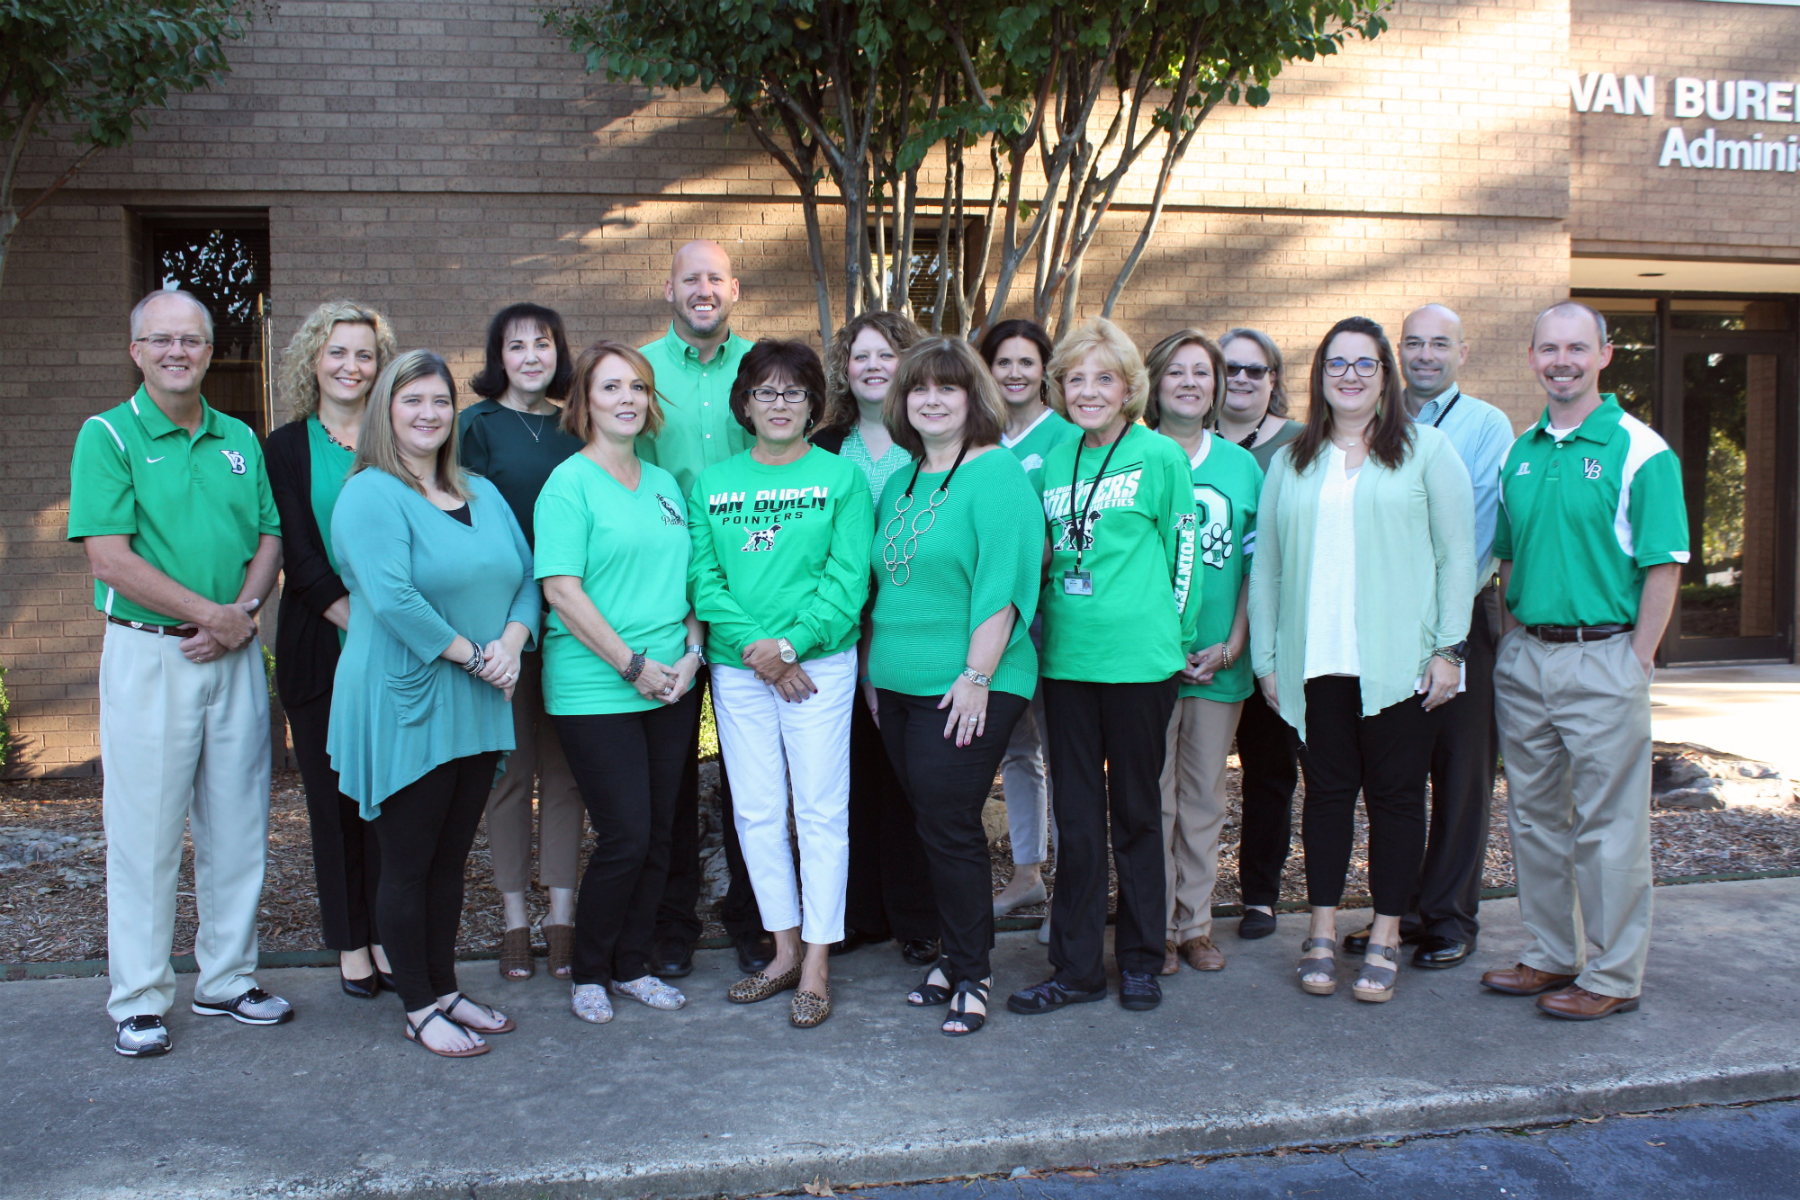 VBSD to kick off Bully Prevention Month with “Green Day”